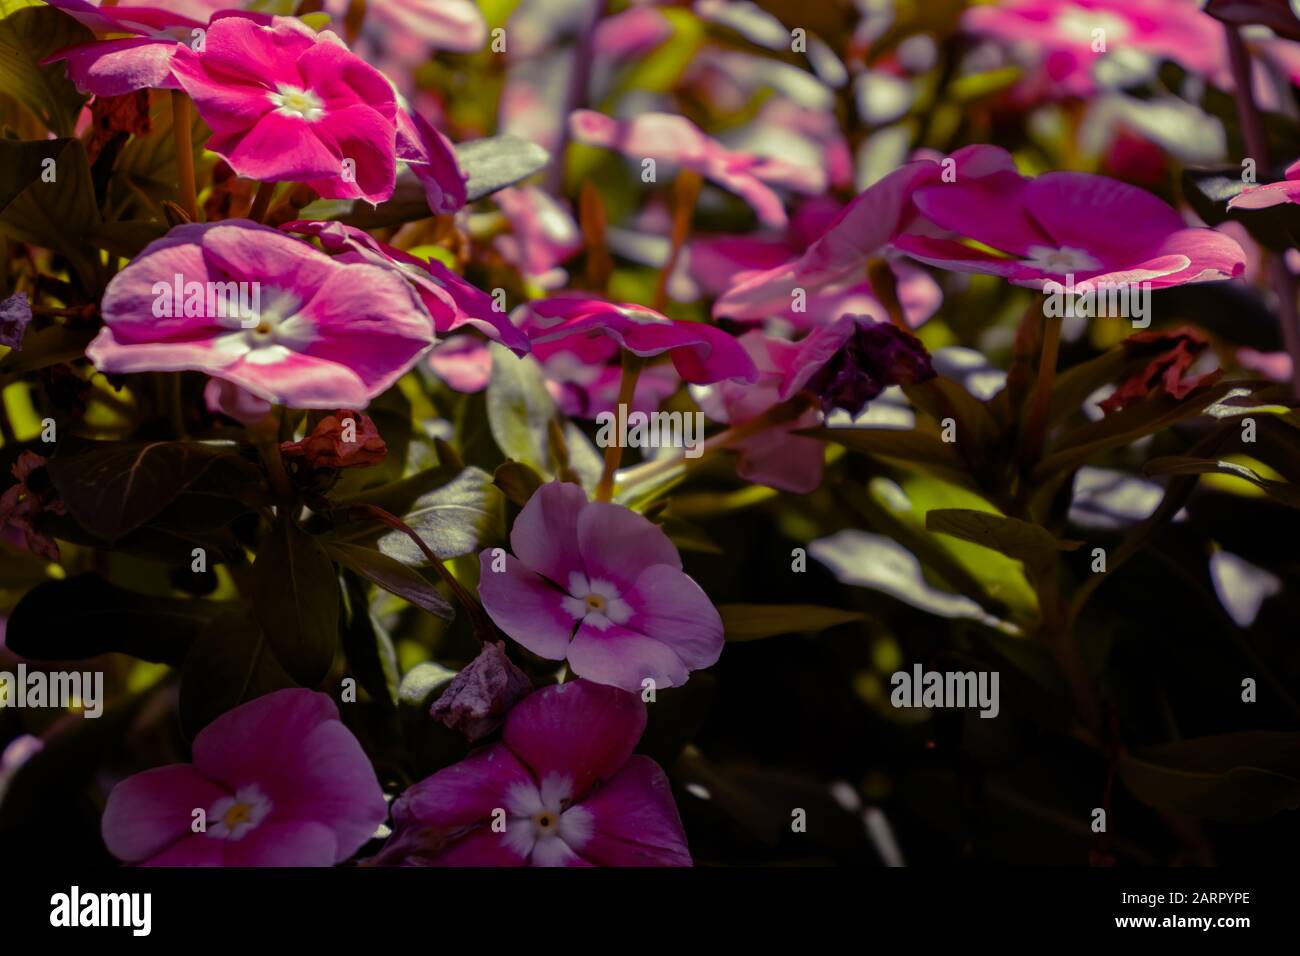 Impatiens Flowers outdoors during summer. Stock Photo